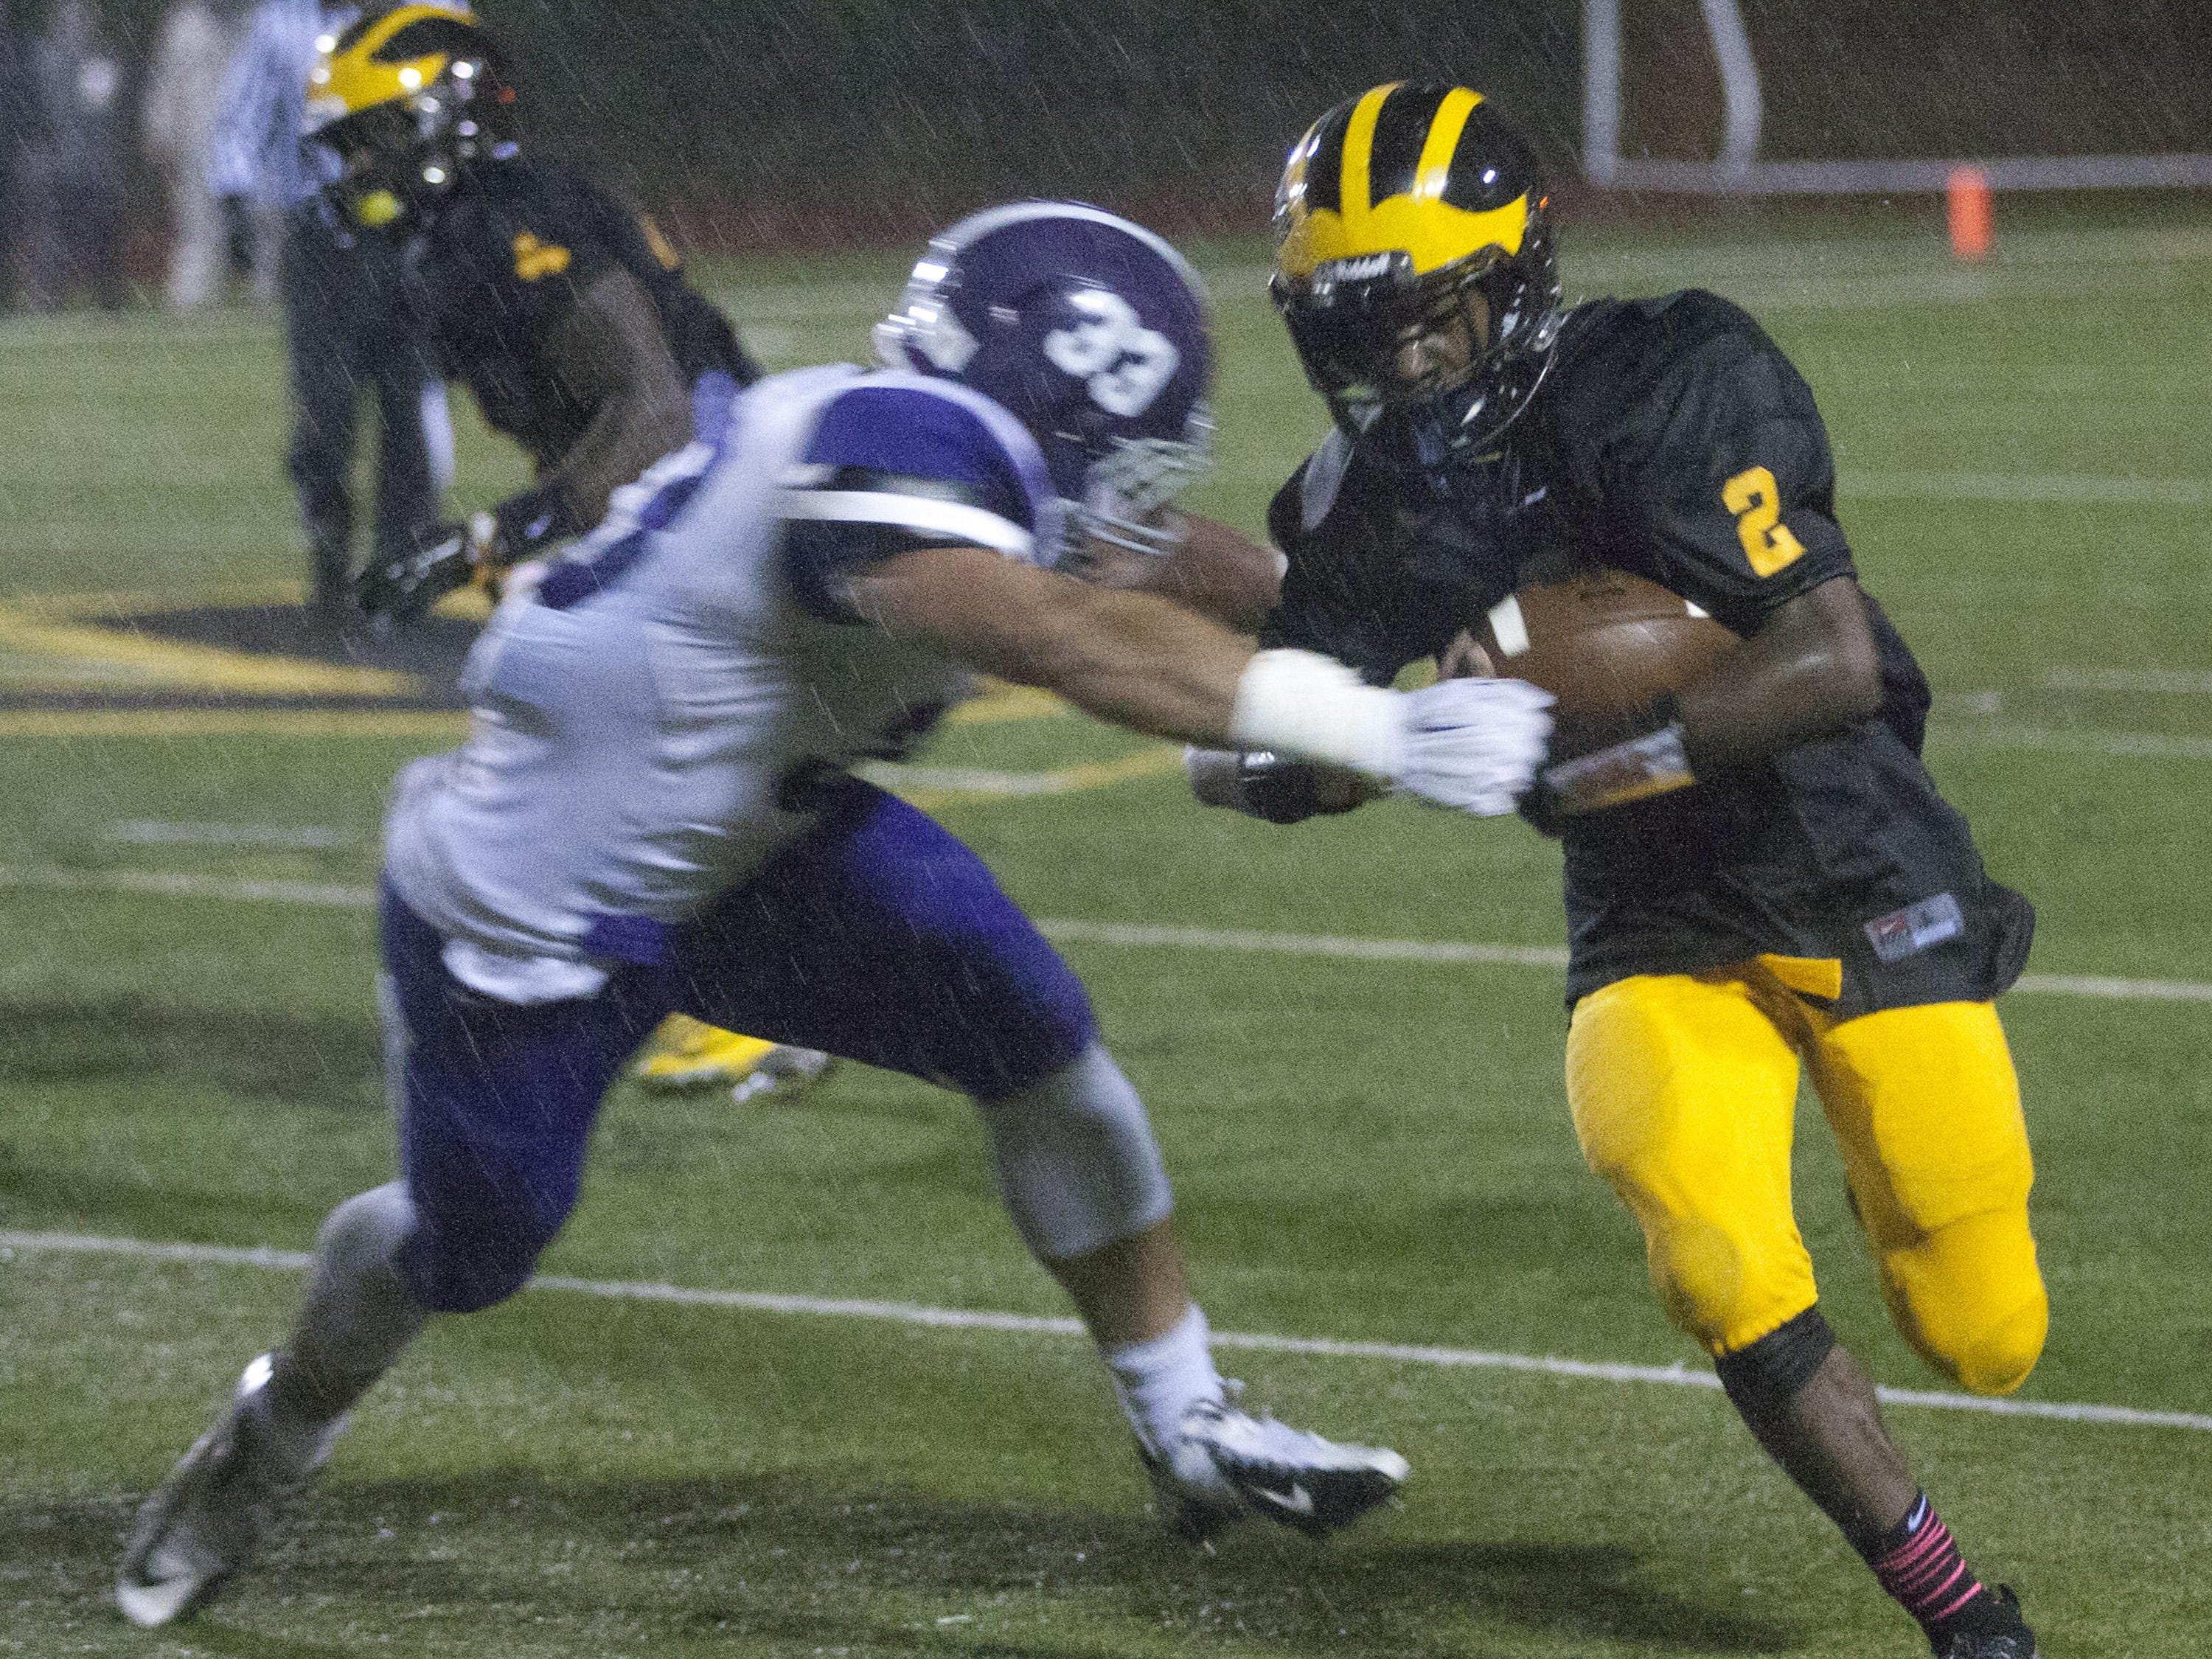 St. John Vianney's Khalil Haskins tries to outrun Rumson's Mike Ruane during first half action. Rumson-Fair Haven Football vs St John Vianney in Holmdel, NJ on October 2, 2015.